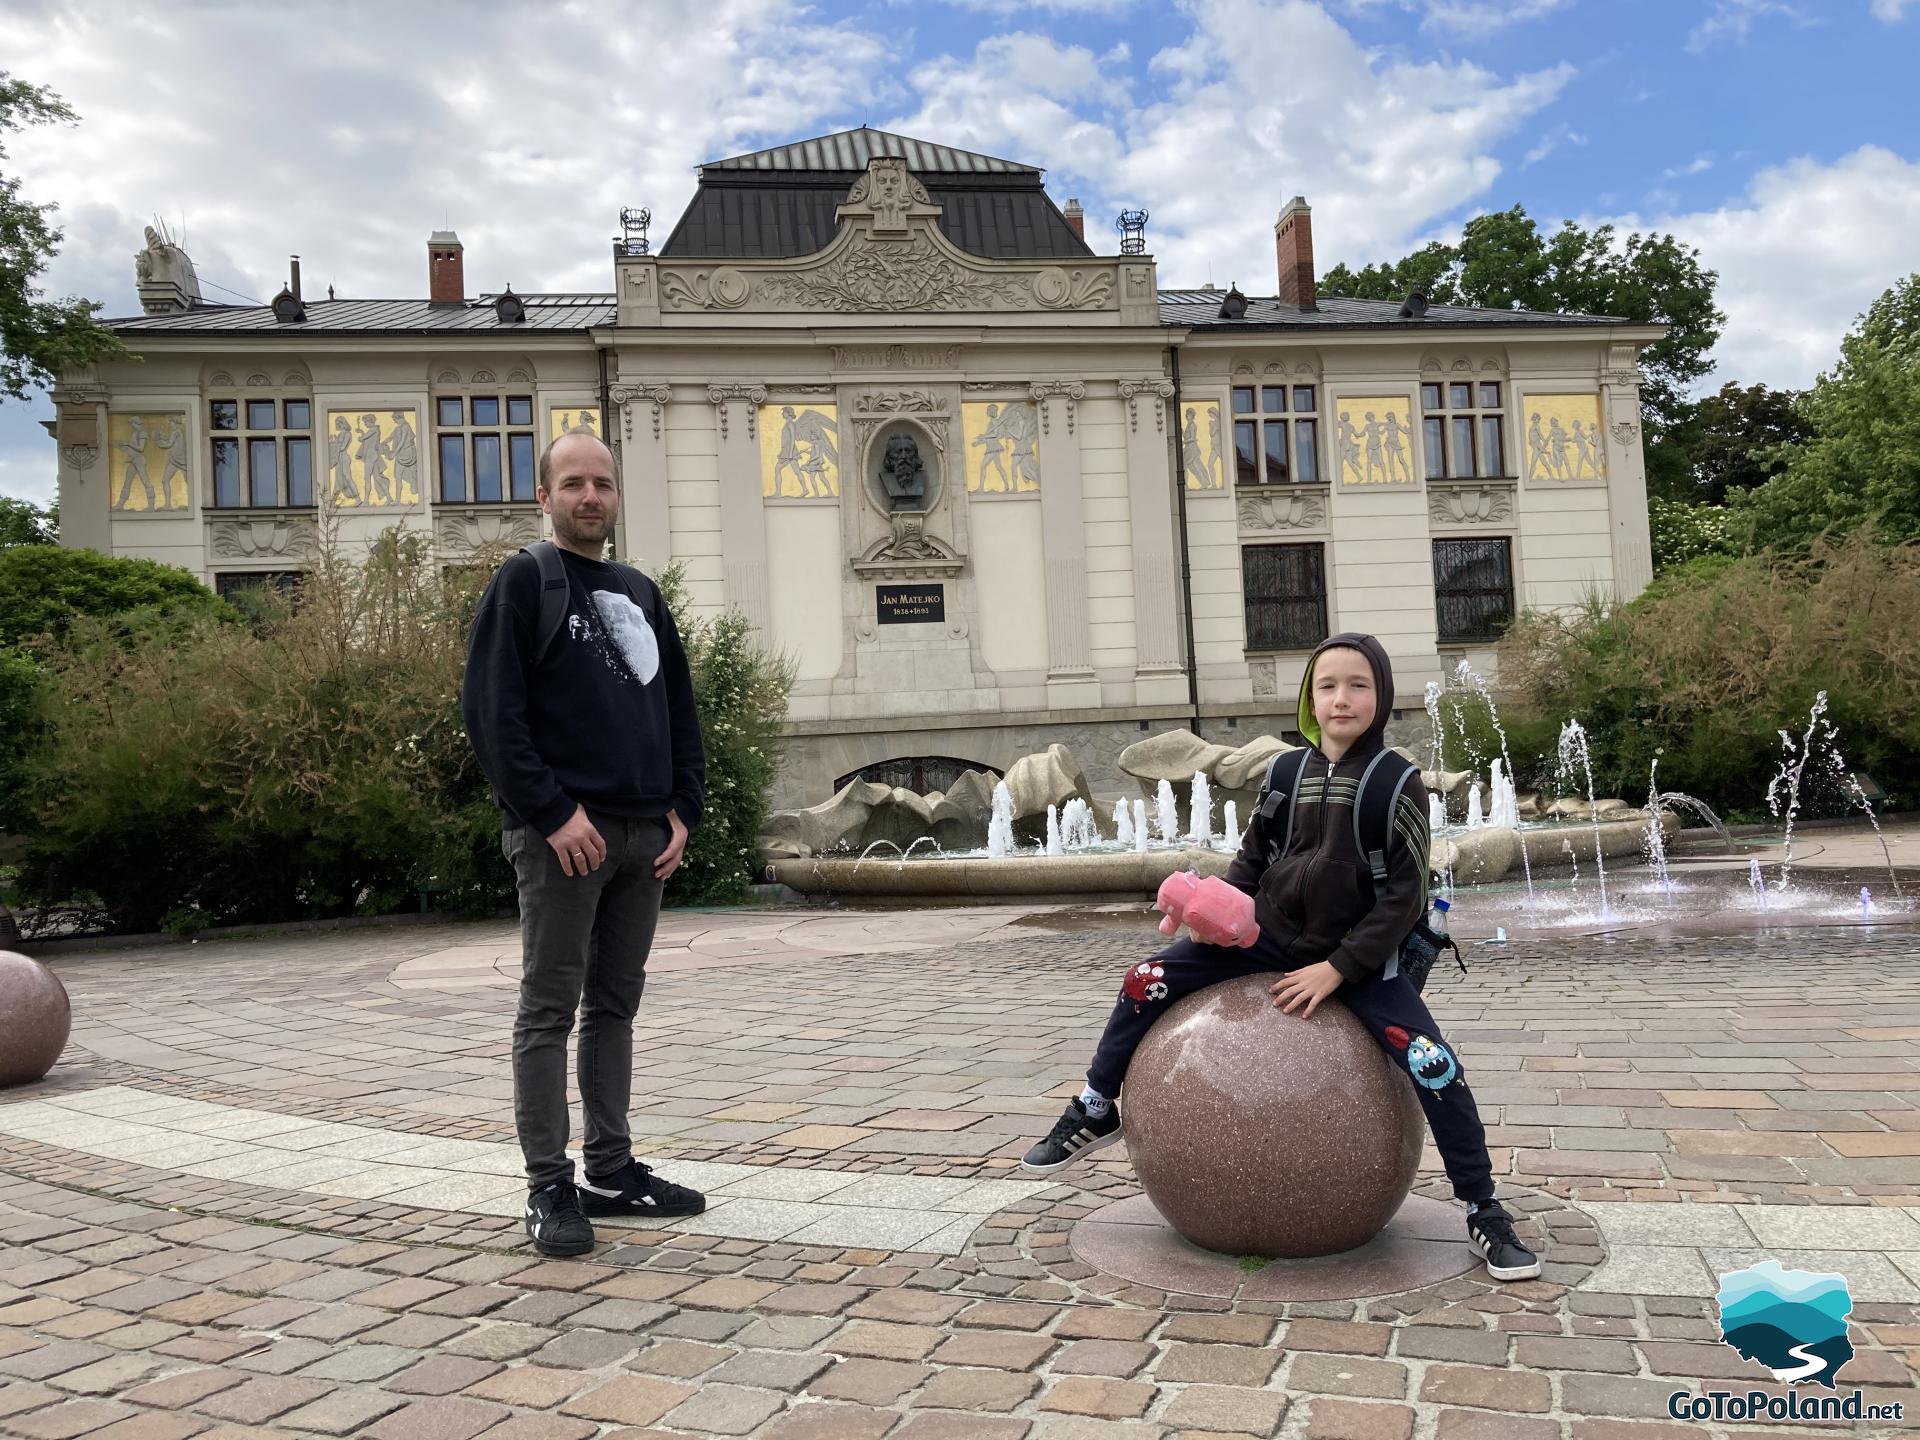 a man is standing, next to him a boy is sitting on a ball made of stone, behind them a fountain and a decorative building with a bust of Jan Matejko